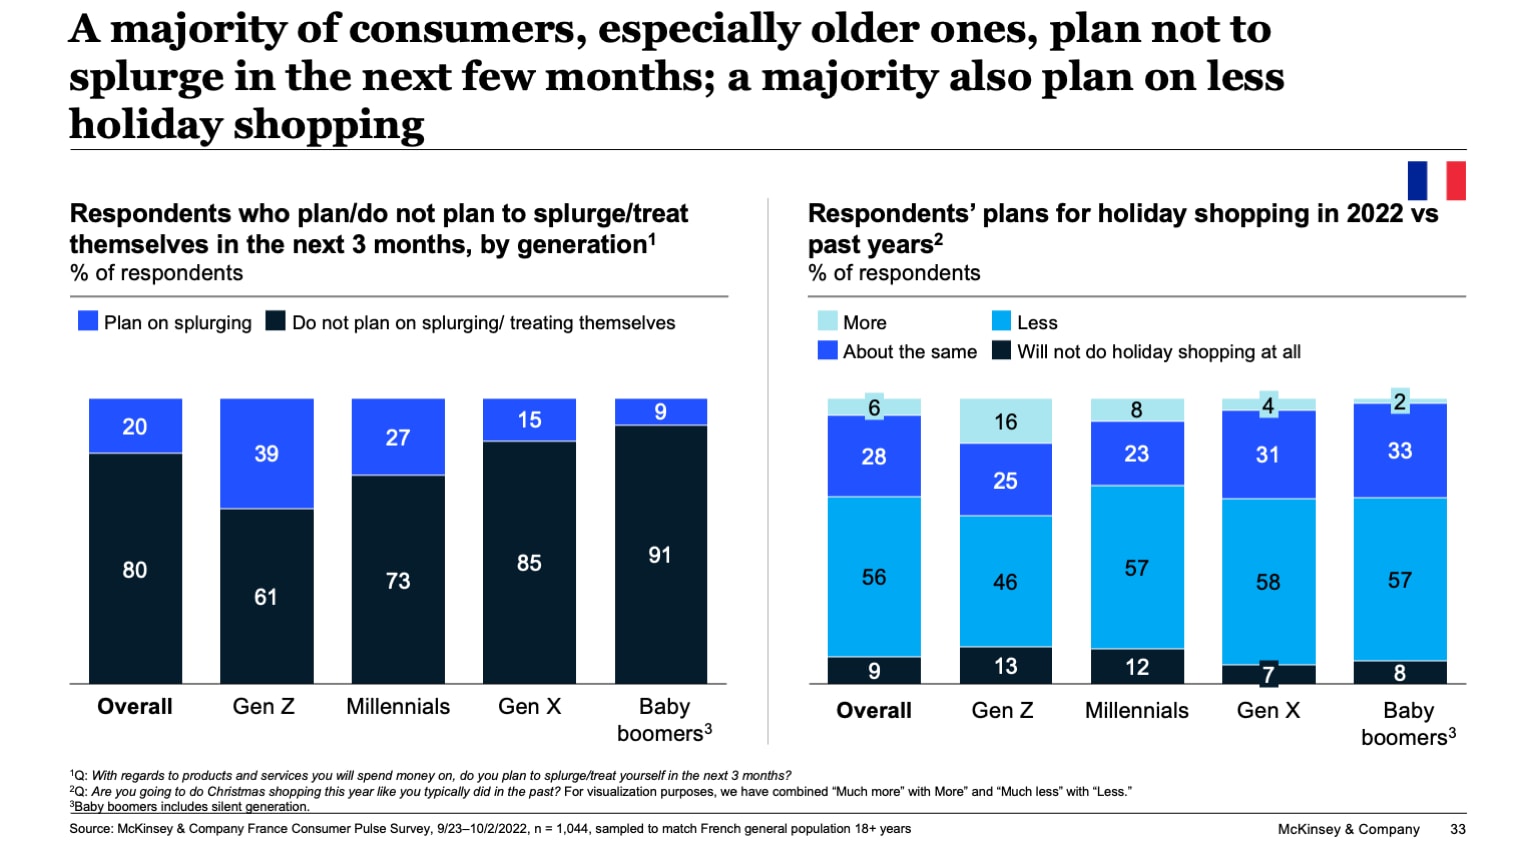 A majority of consumers, especially older ones, plan not to splurge in the next few months; a majority also plan on less holiday shopping